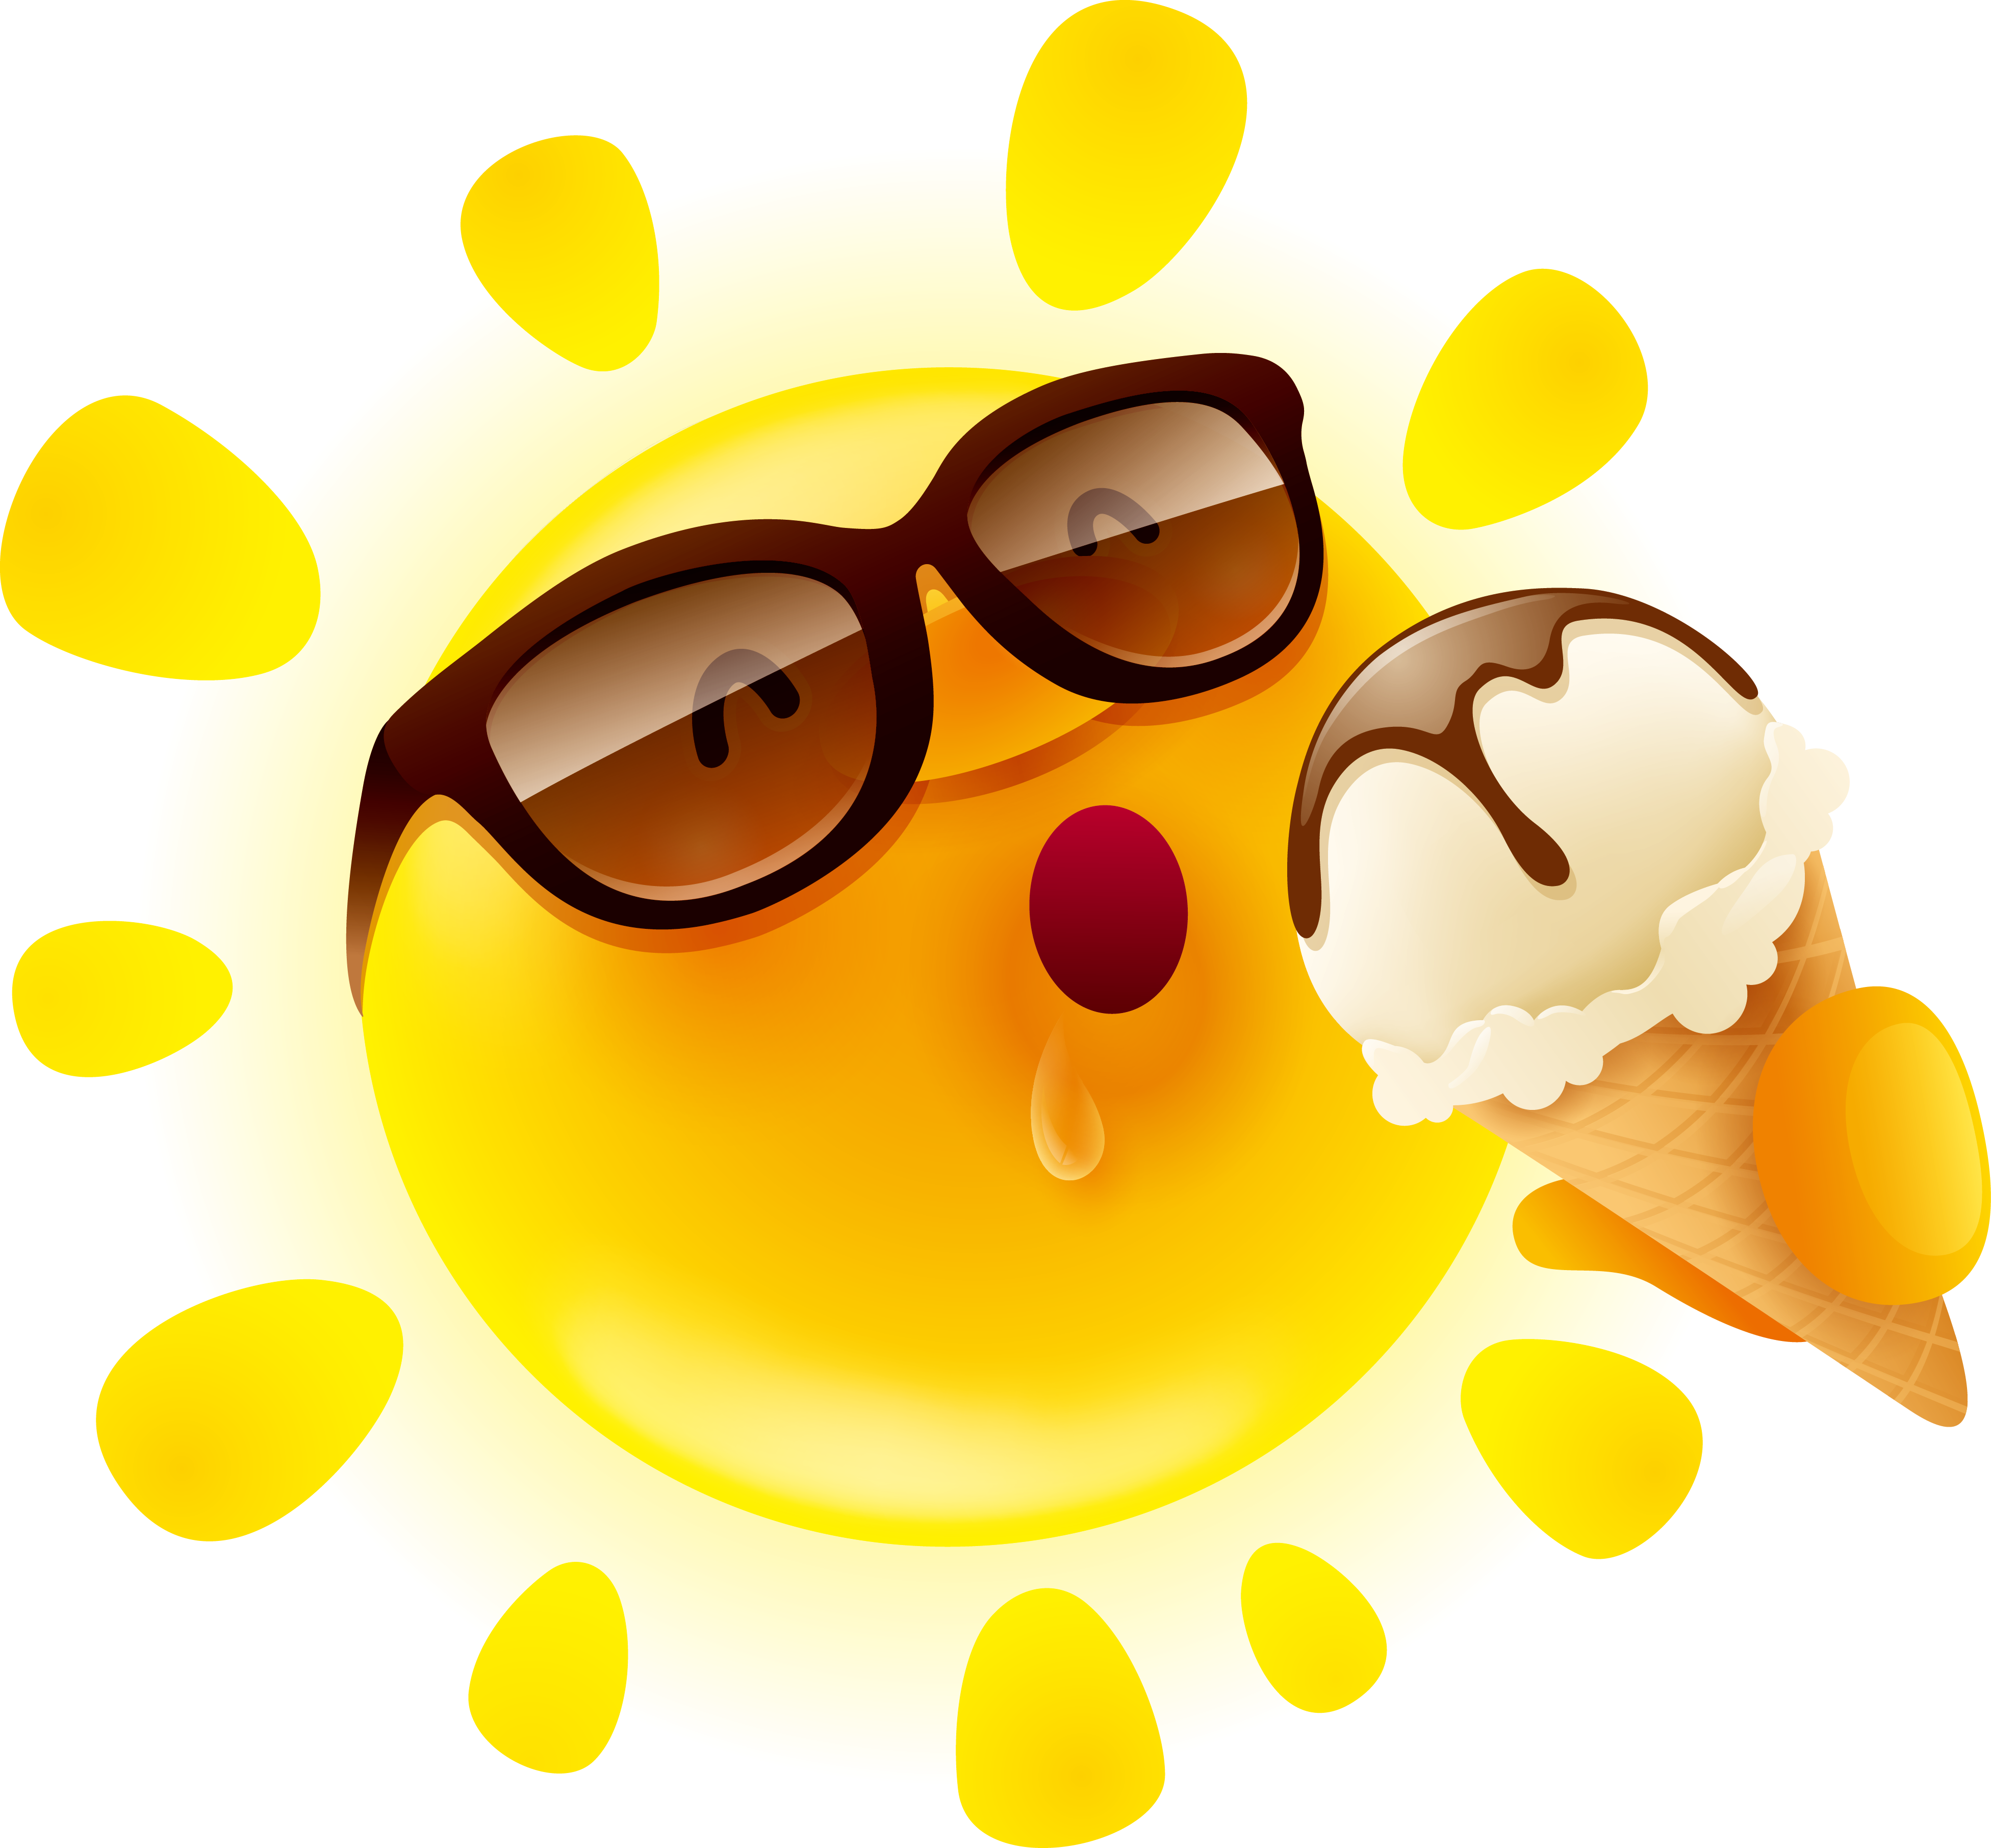 Sun Cartoon Cone Ice Cream PNG Image High Quality Clipart